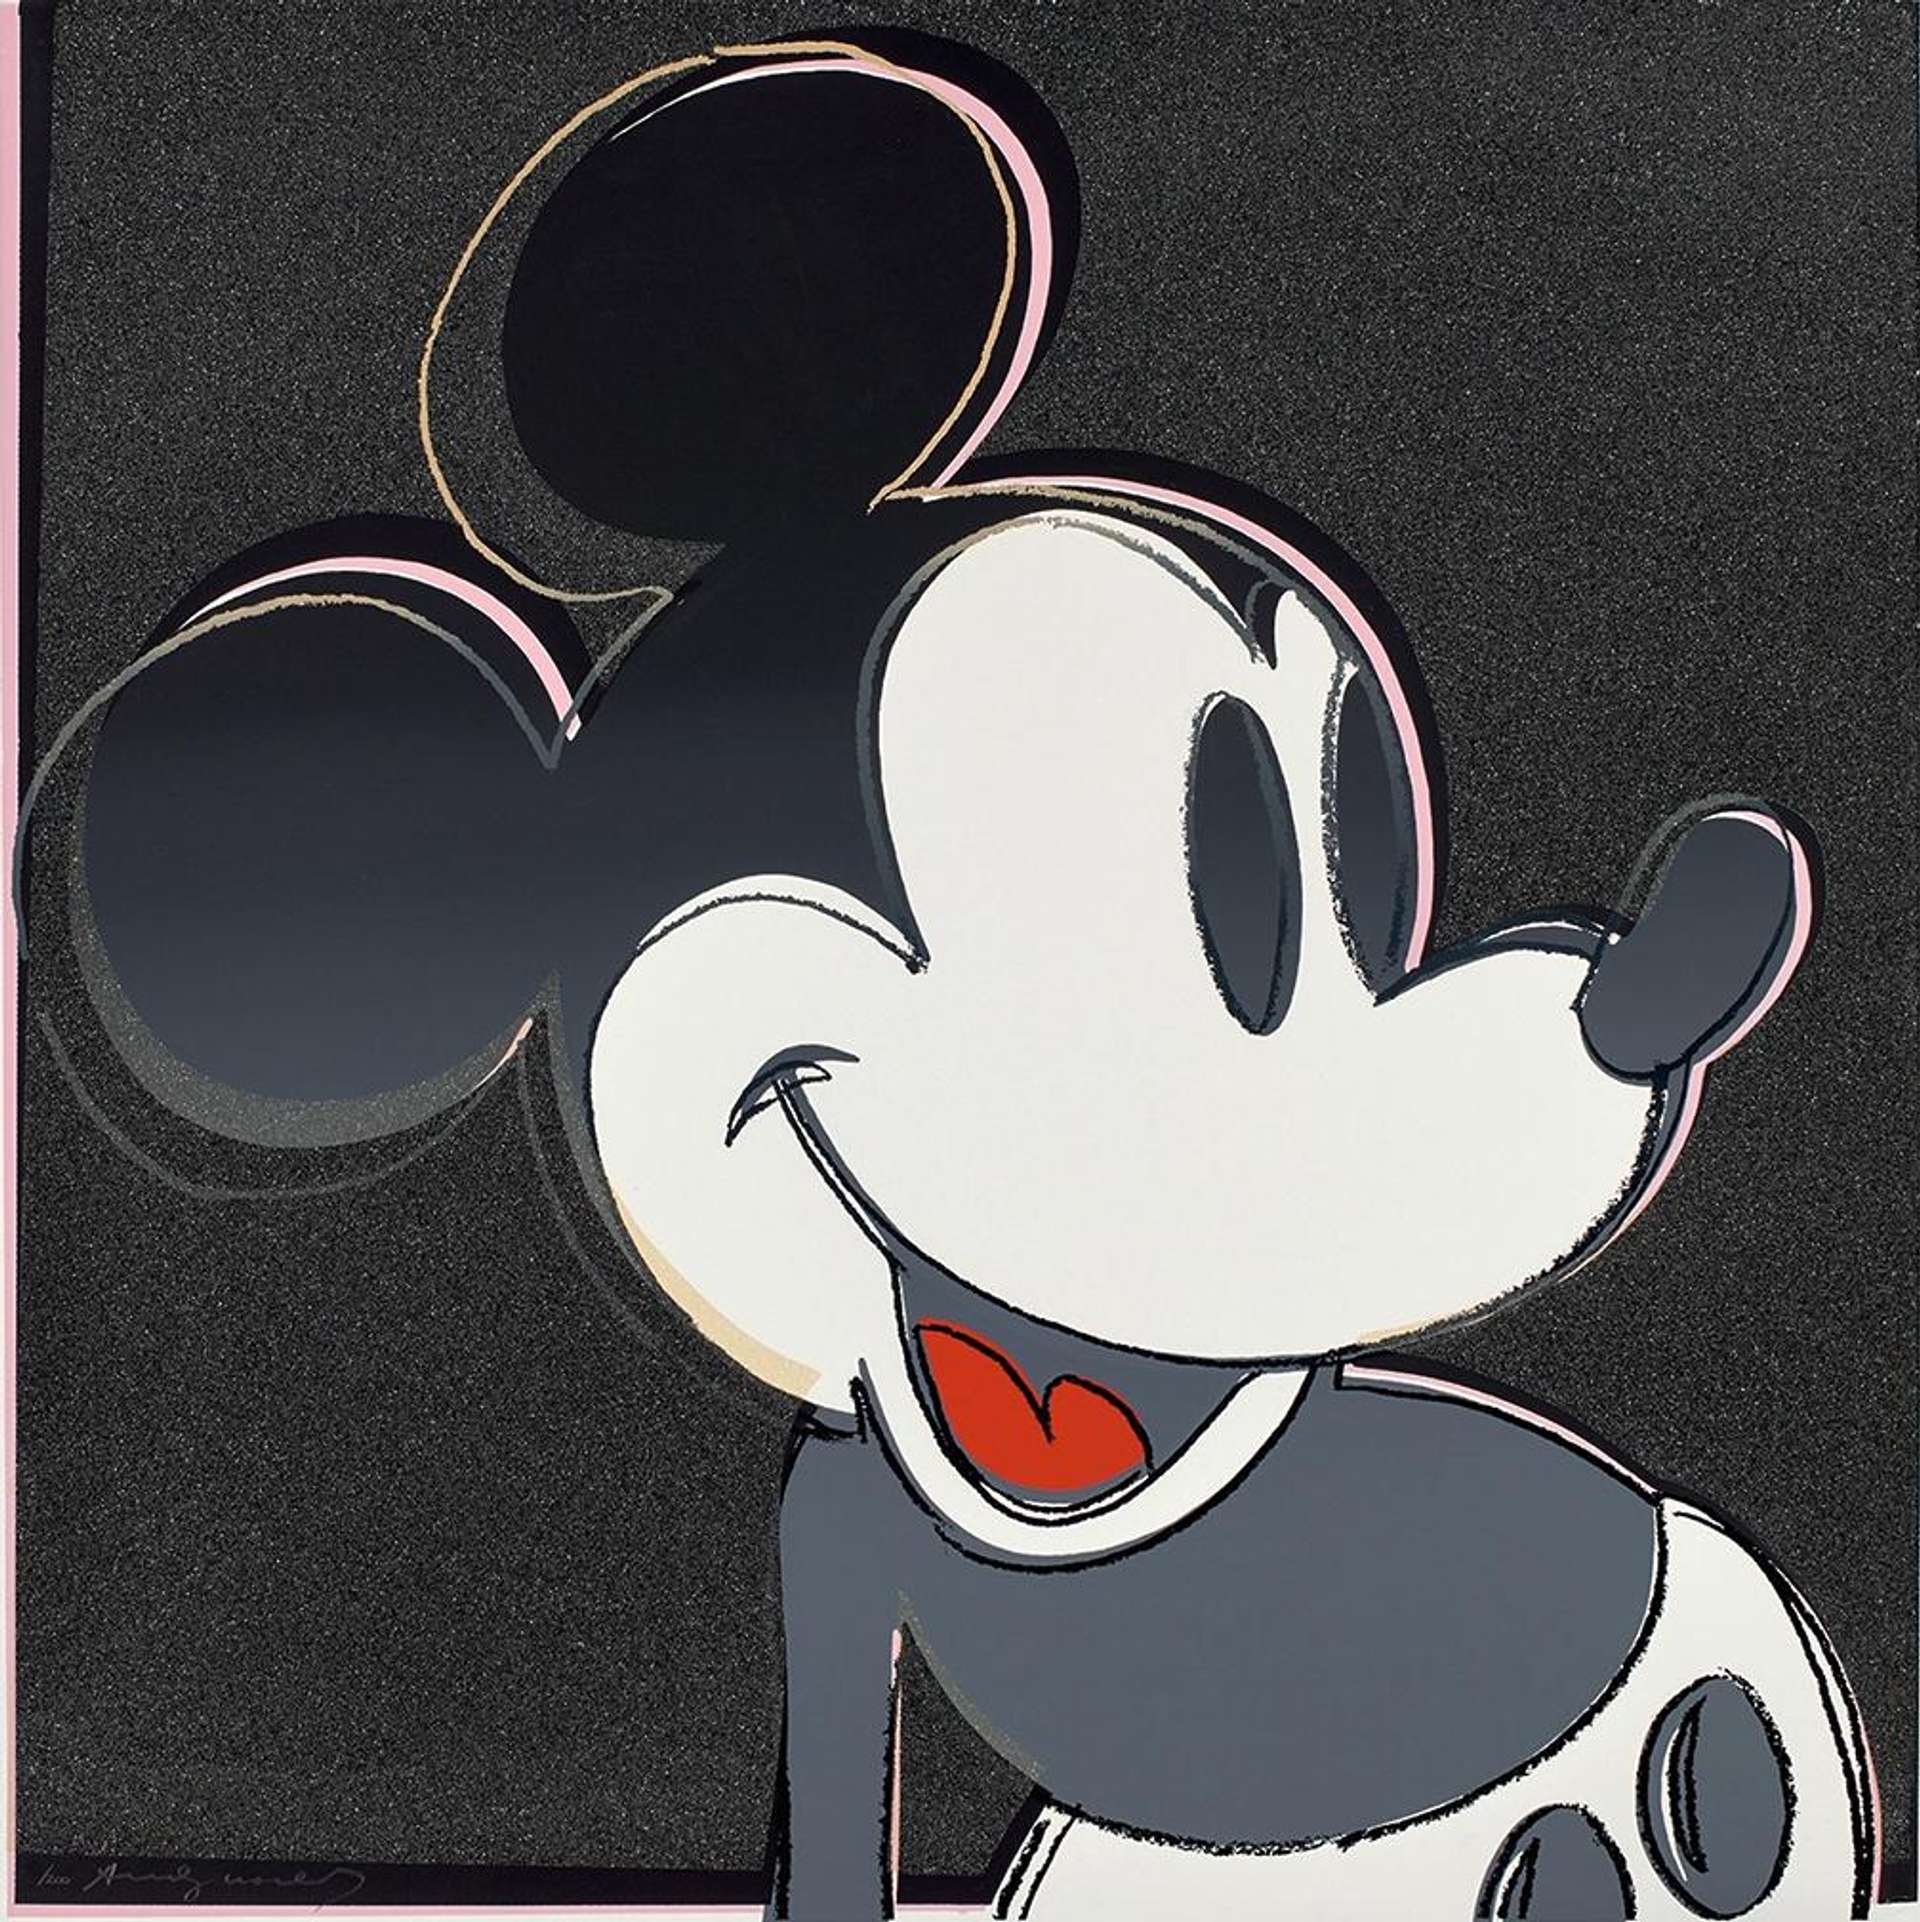 This print by Andy Warhol shows Mickey Mouse rendered from side on, looking ecstatically at something outside of the composition. Black, white and grey dominate the composition which has splashes of colour from the cartoon’s wide red grin and the pink and gold gestural lines that outline the mouse’s smiling face.